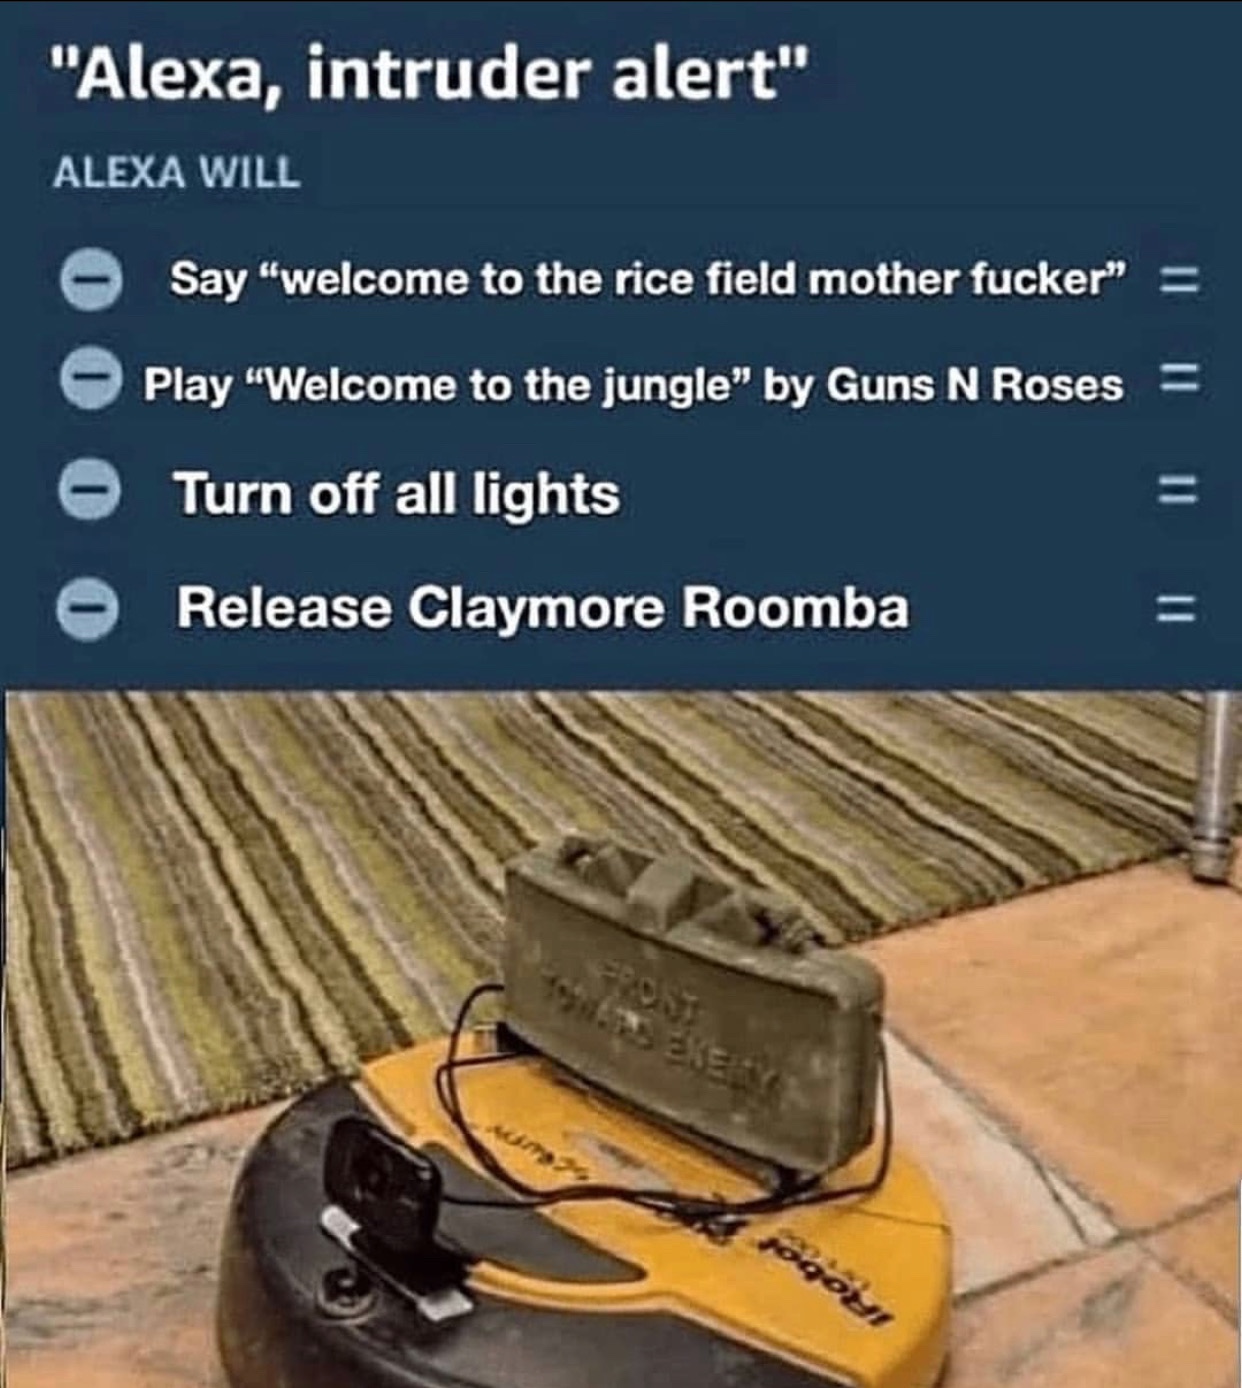 claymore roomba - "Alexa, intruder alert" Alexa Will Say "welcome to the rice field mother fucker" Play "Welcome to the jungle" by Guns N Roses Turn off all lights Release Claymore Roomba